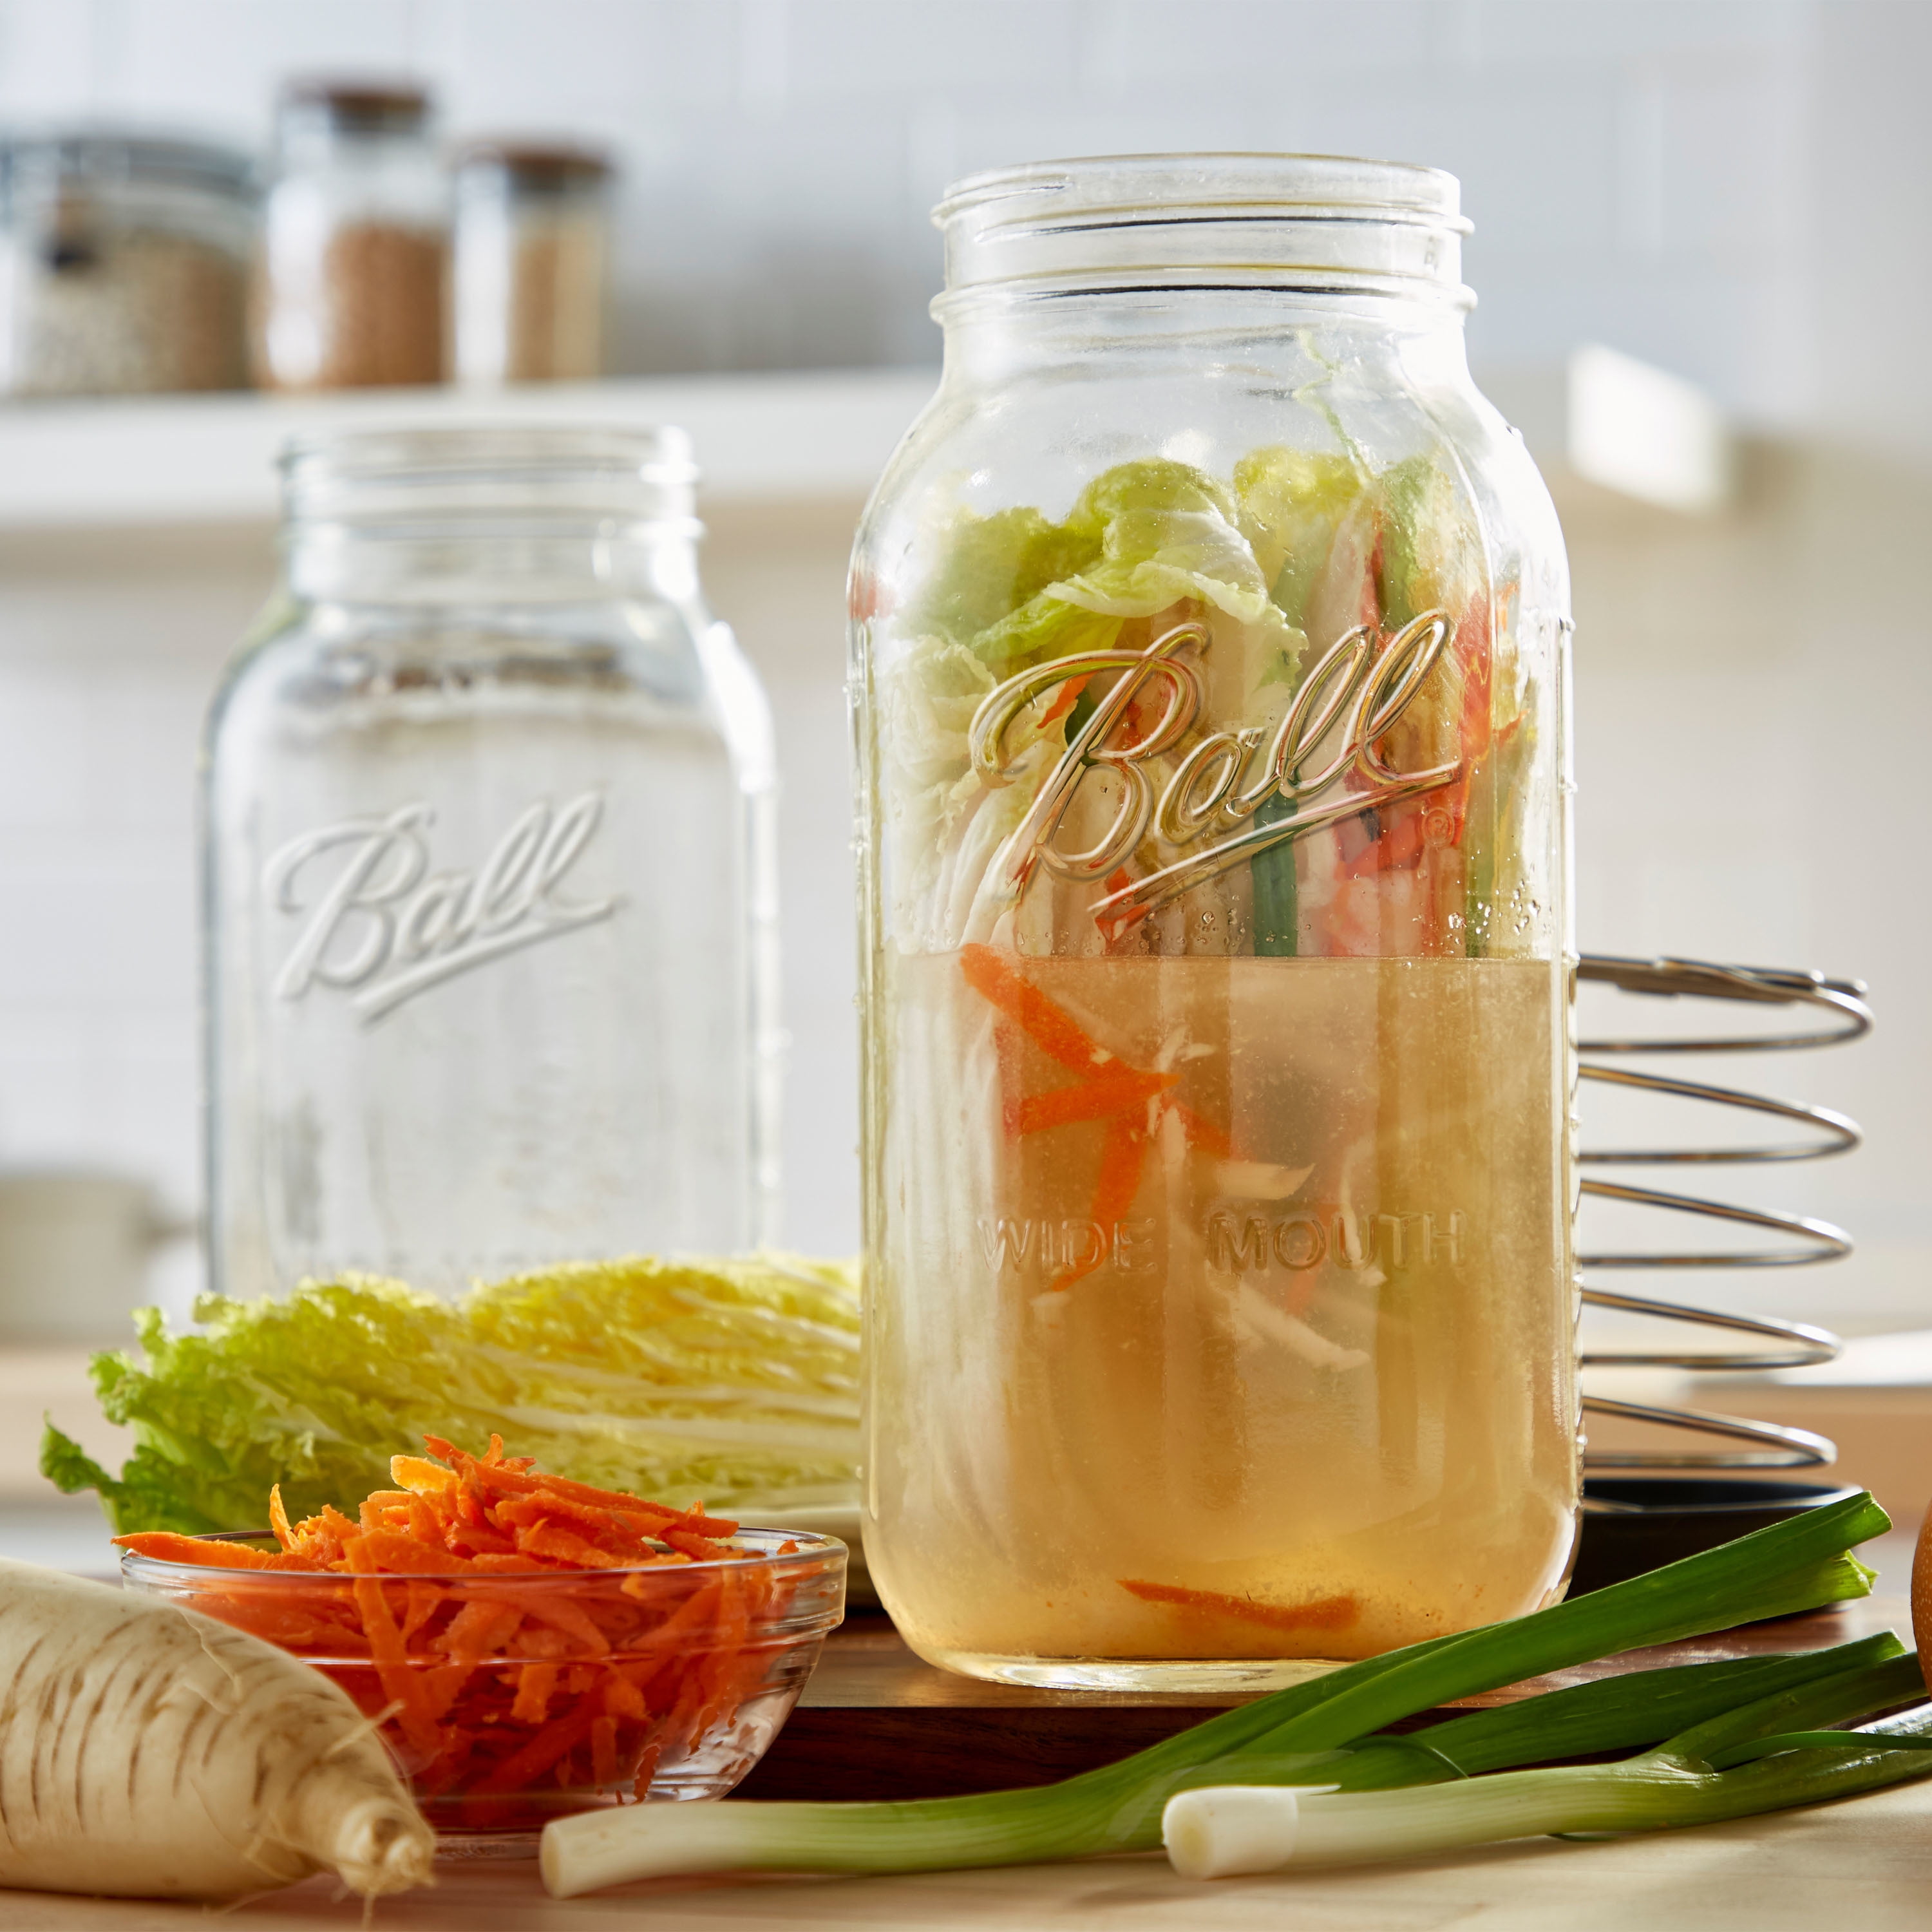 Find more 4 Extra Large Mason Glass Jars - 64 Oz for sale at up to 90% off